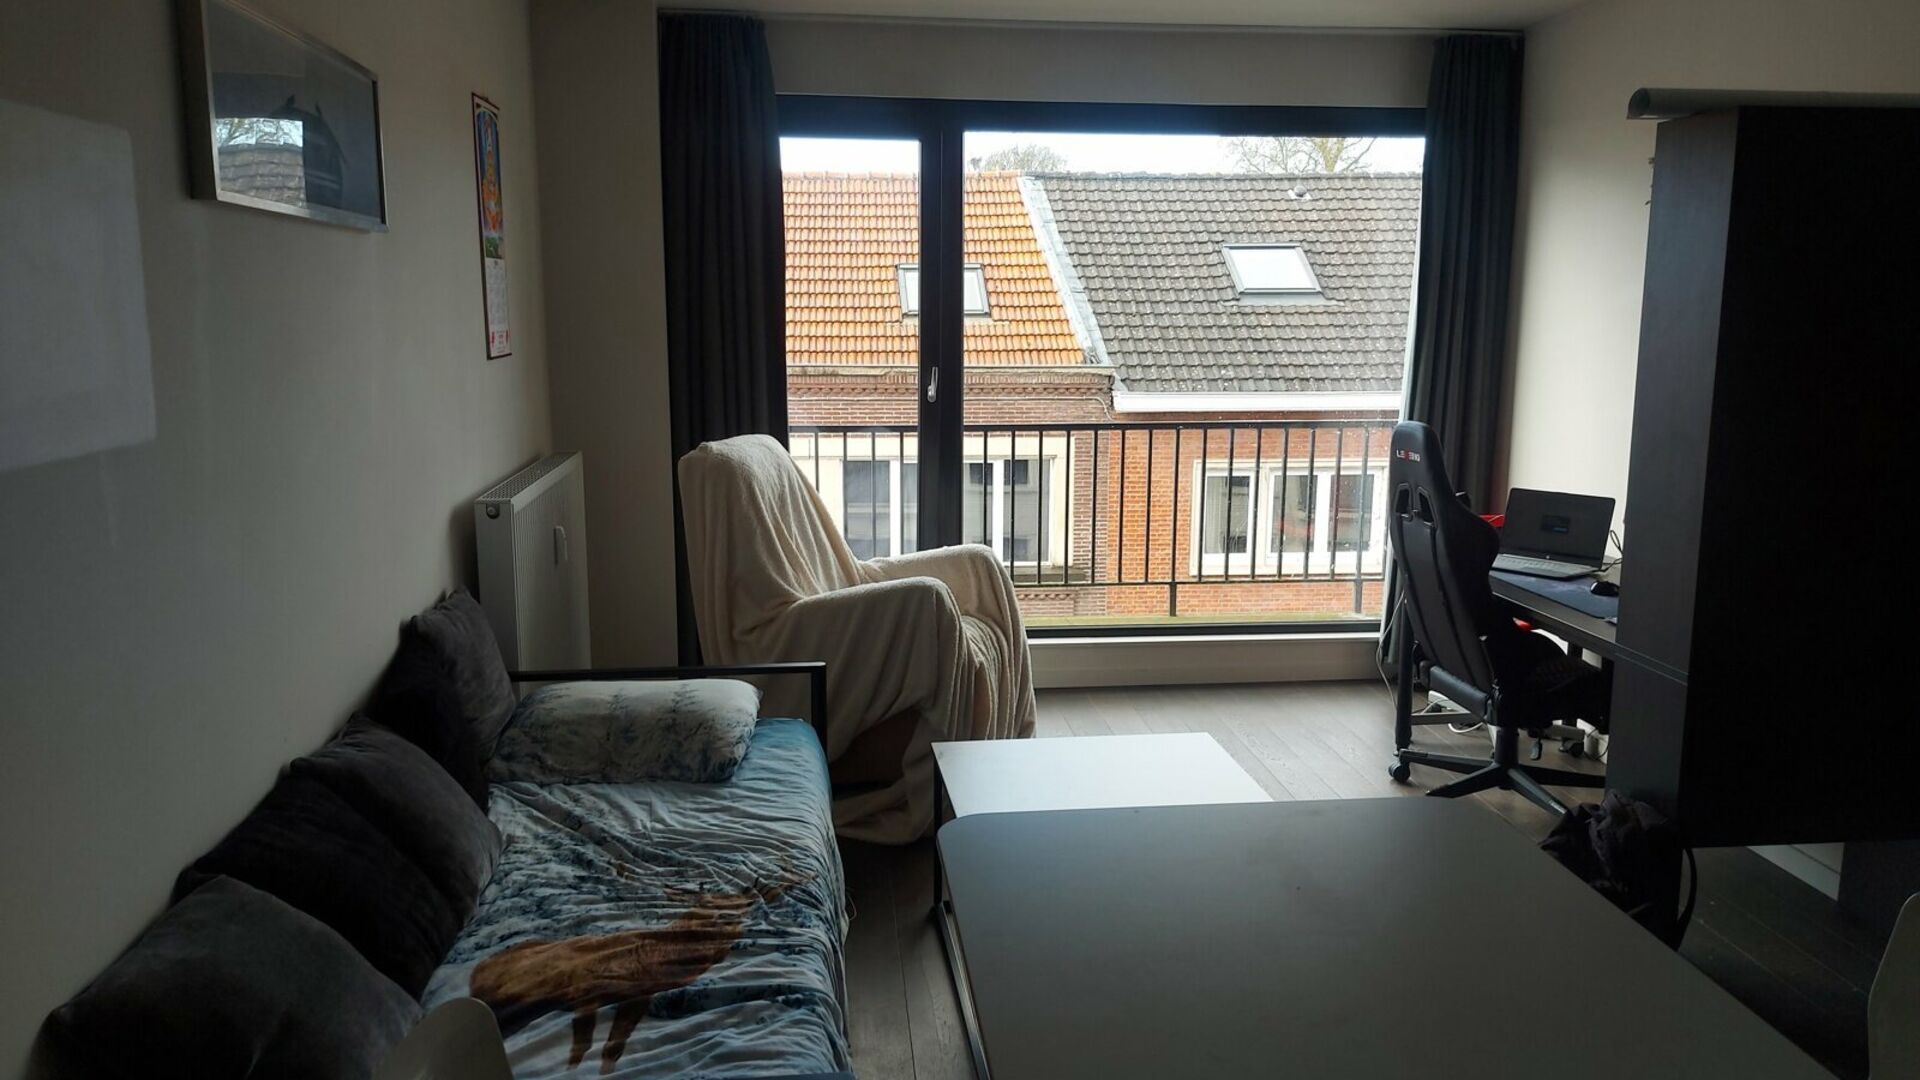 Luxurious studio, of no less than 26 m² located near Campus Gasthuisberg and within walking distance from the center of Leuven, the Grand and Old Market, shopping streets, department stores. This trendy studio is located on the third floor at the front a